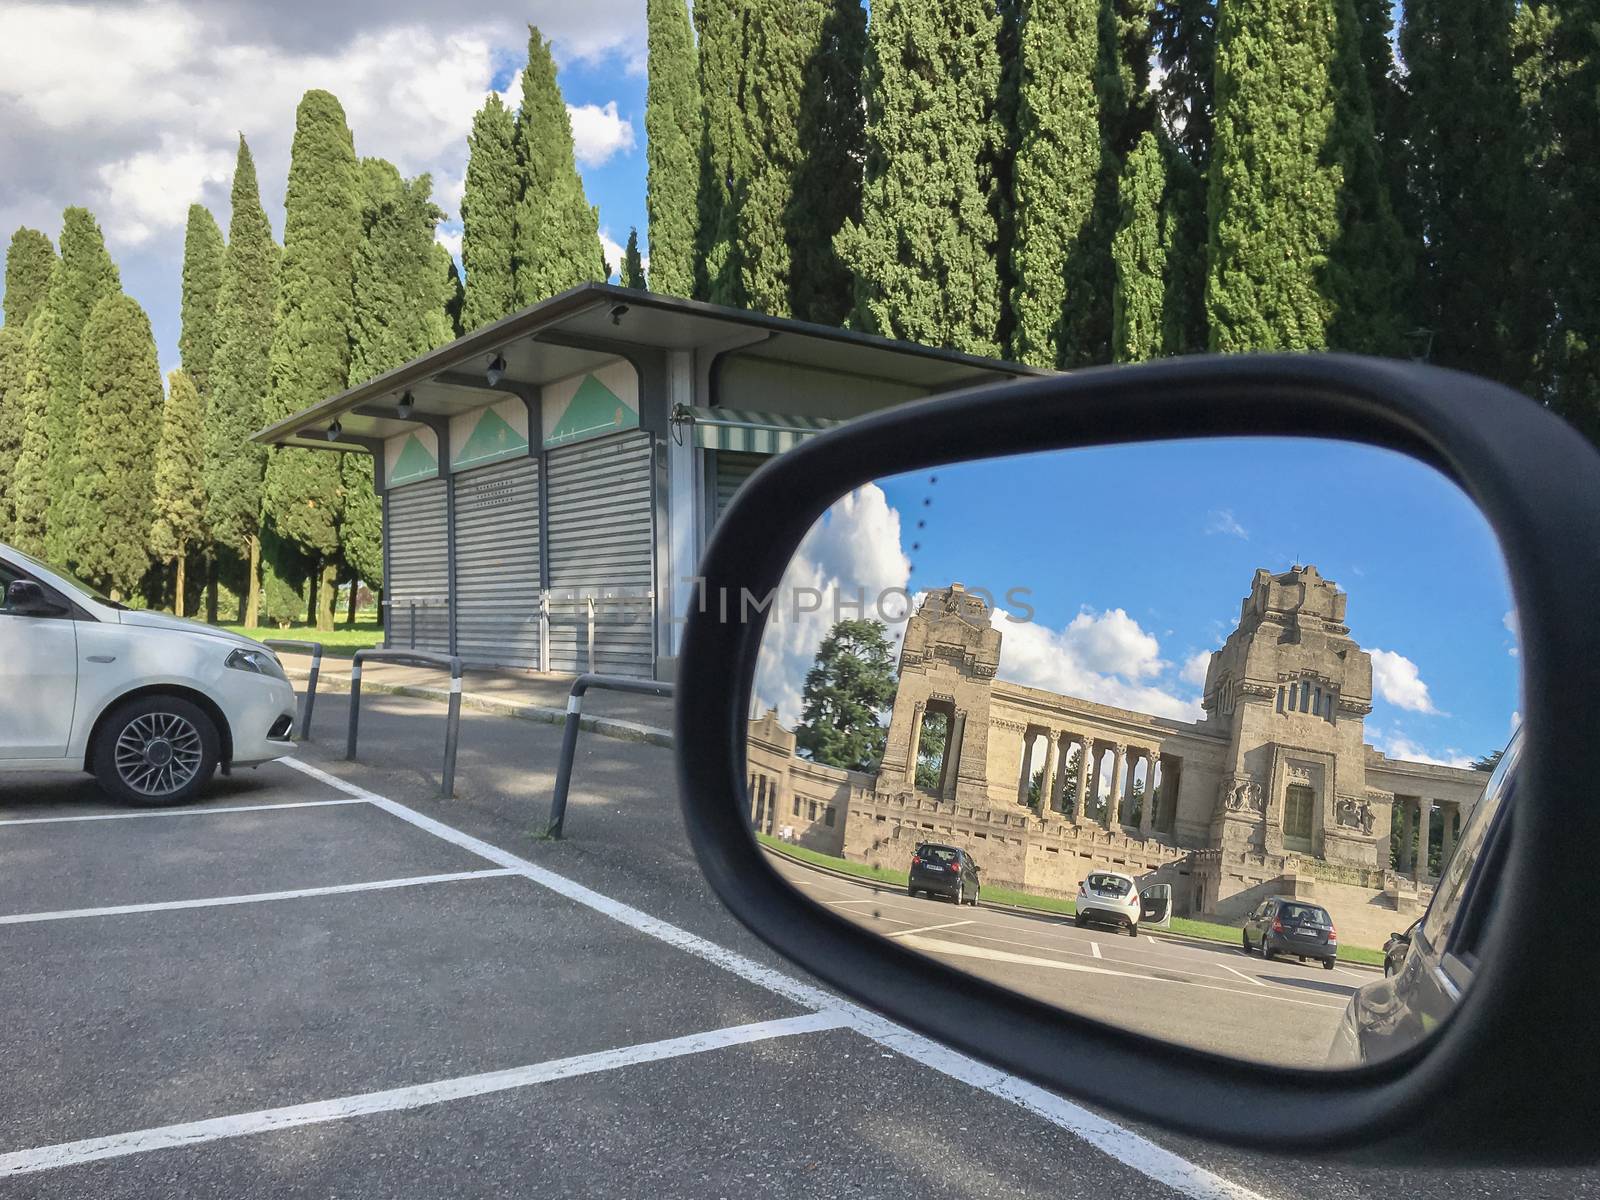 The cemetery of Bergamo reflected in the rearview mirror by germanopoli